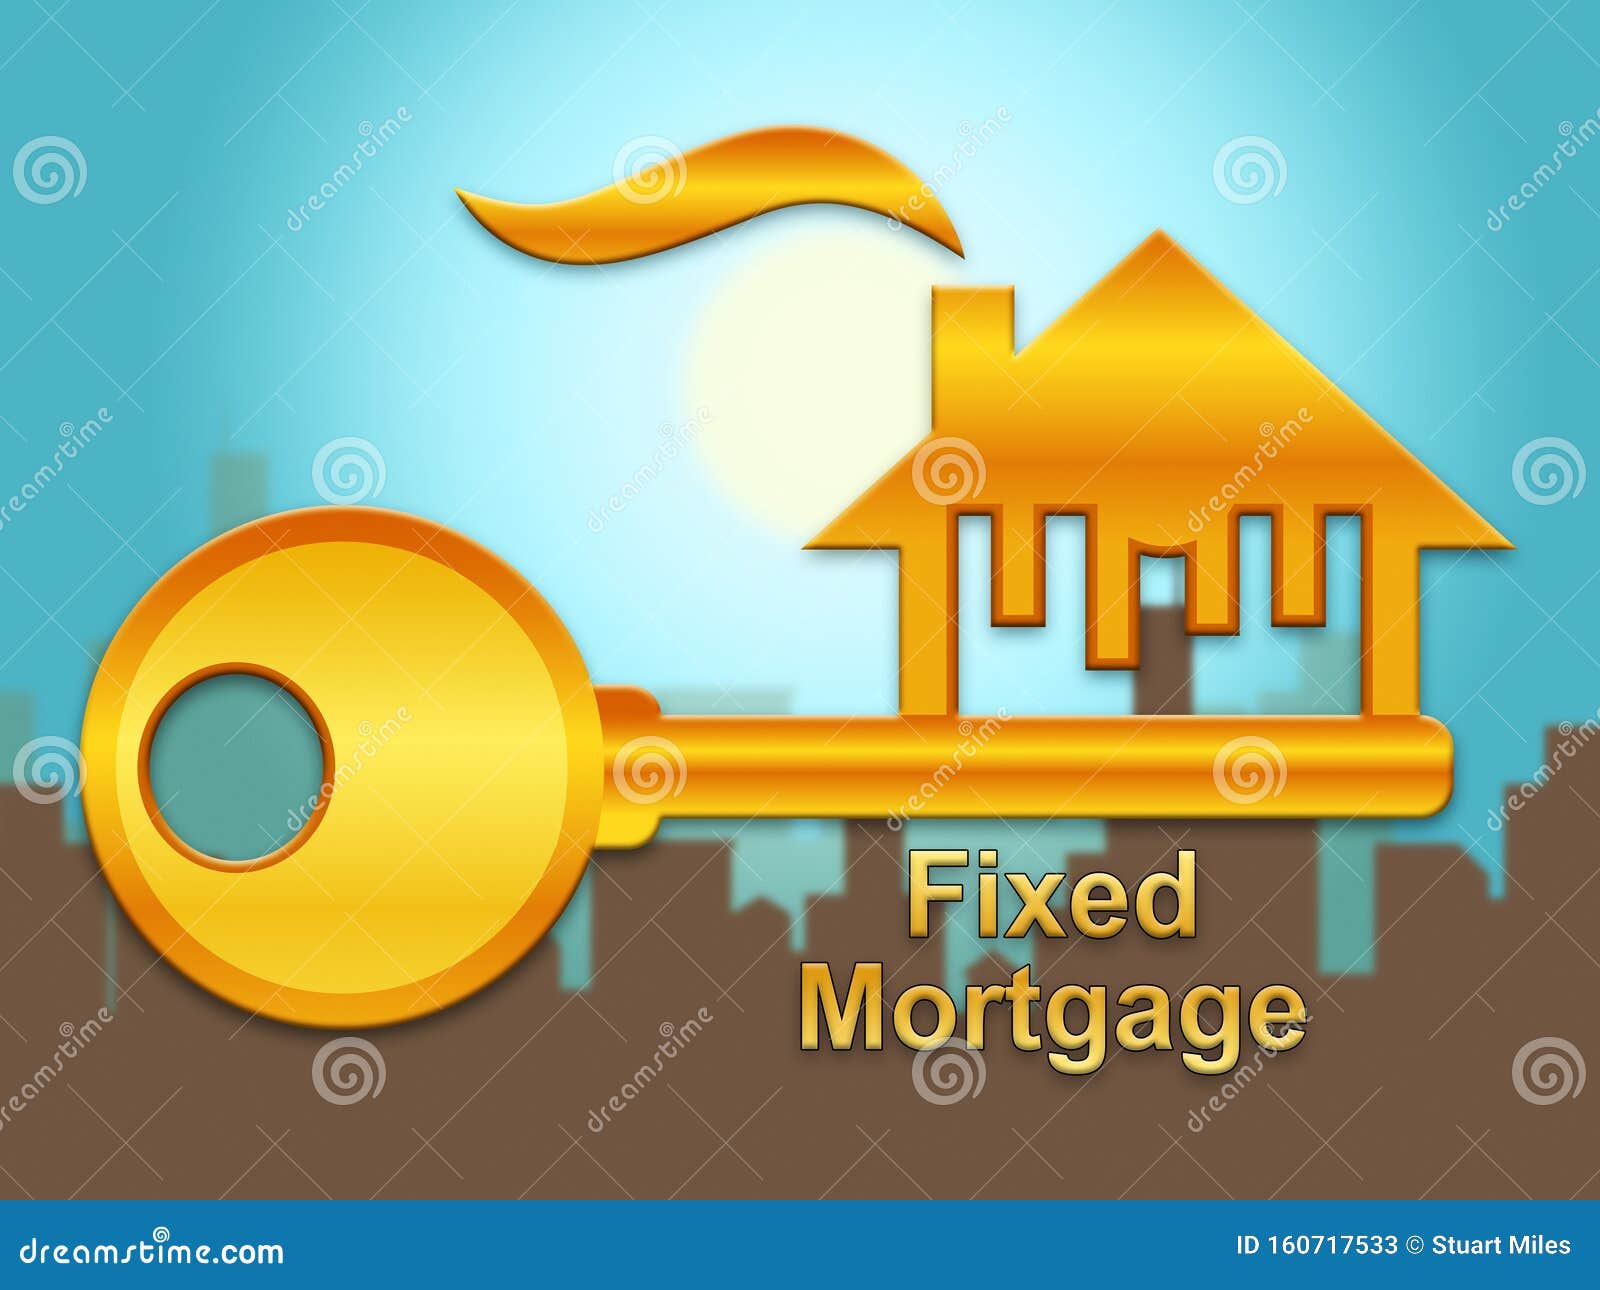 Fixed Rate Mortgage Icon Depicts Home or Property Loan with Payment Fix ...